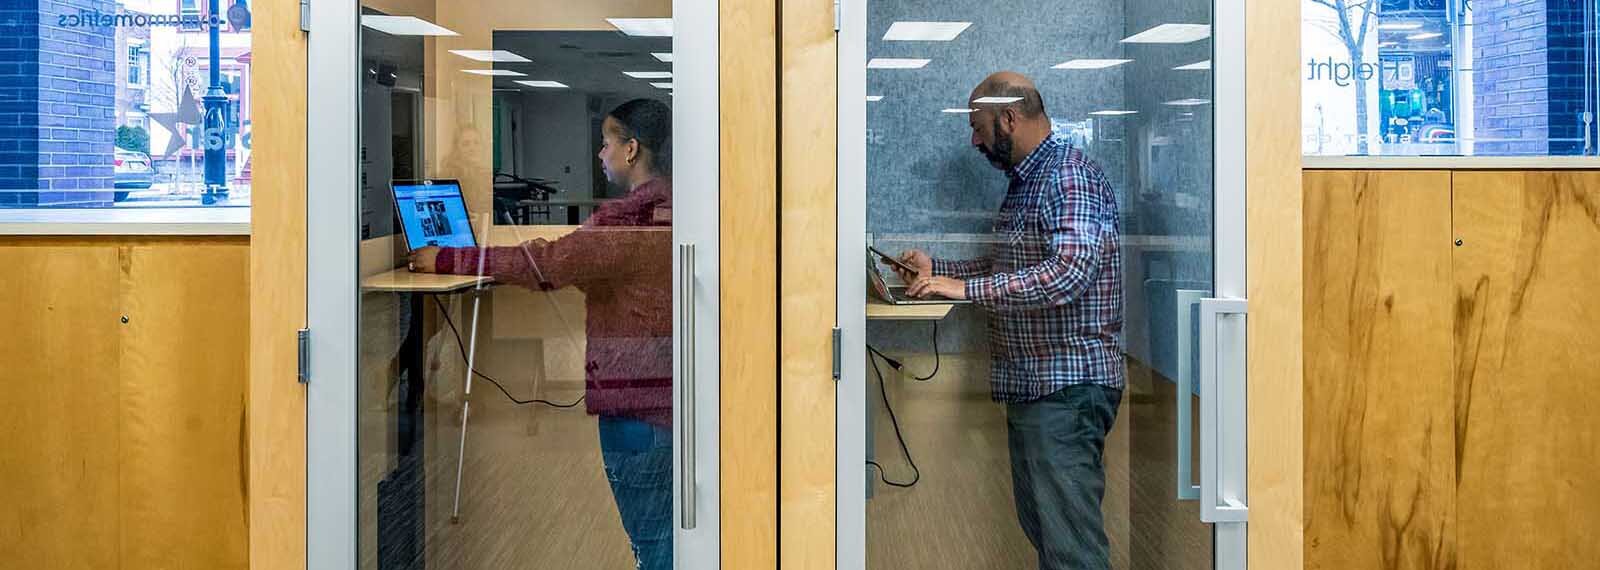 Ann Arbor SPARK's incubator spaces will be adjusted to meet social distancing guidelines when SPARK facilities reopen, including blocking off use of telephone booths. 